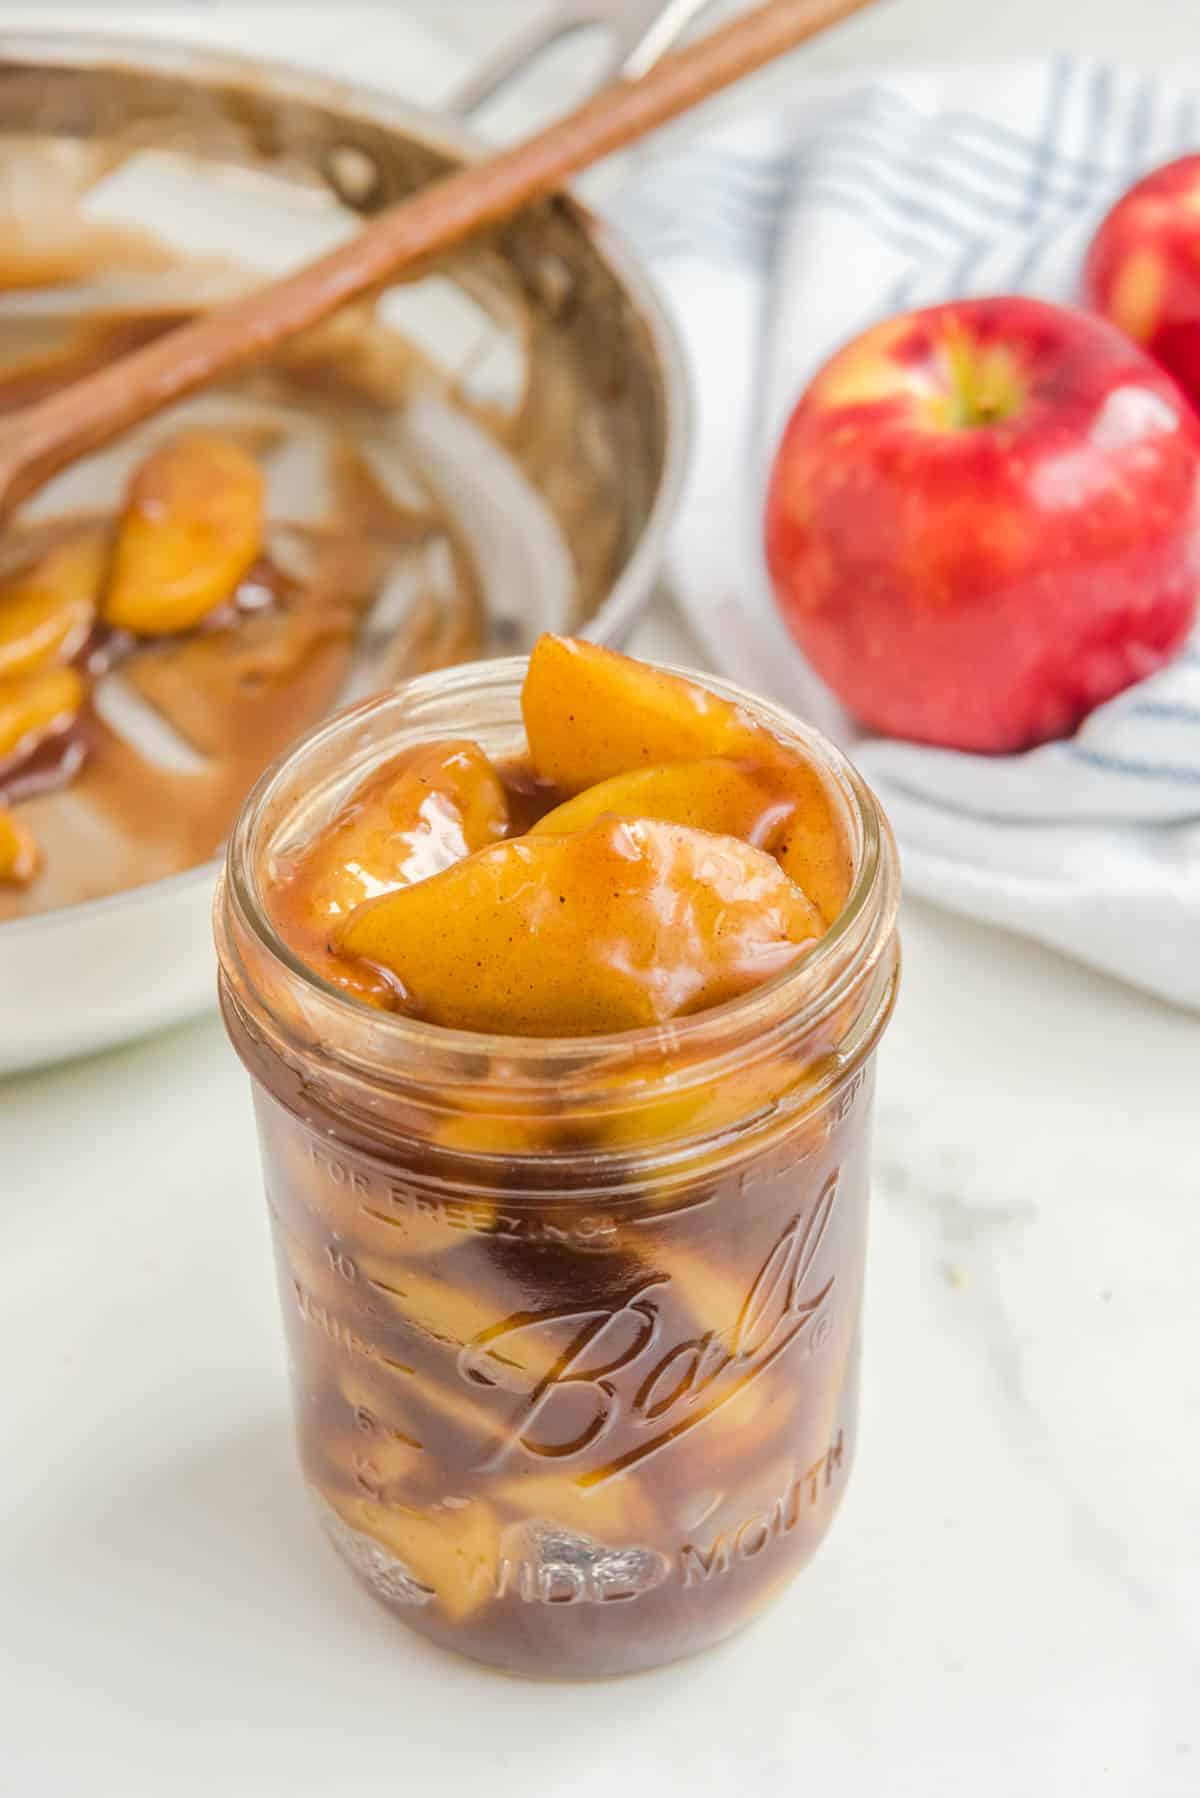 apple pie filling in mason jar with apples in background